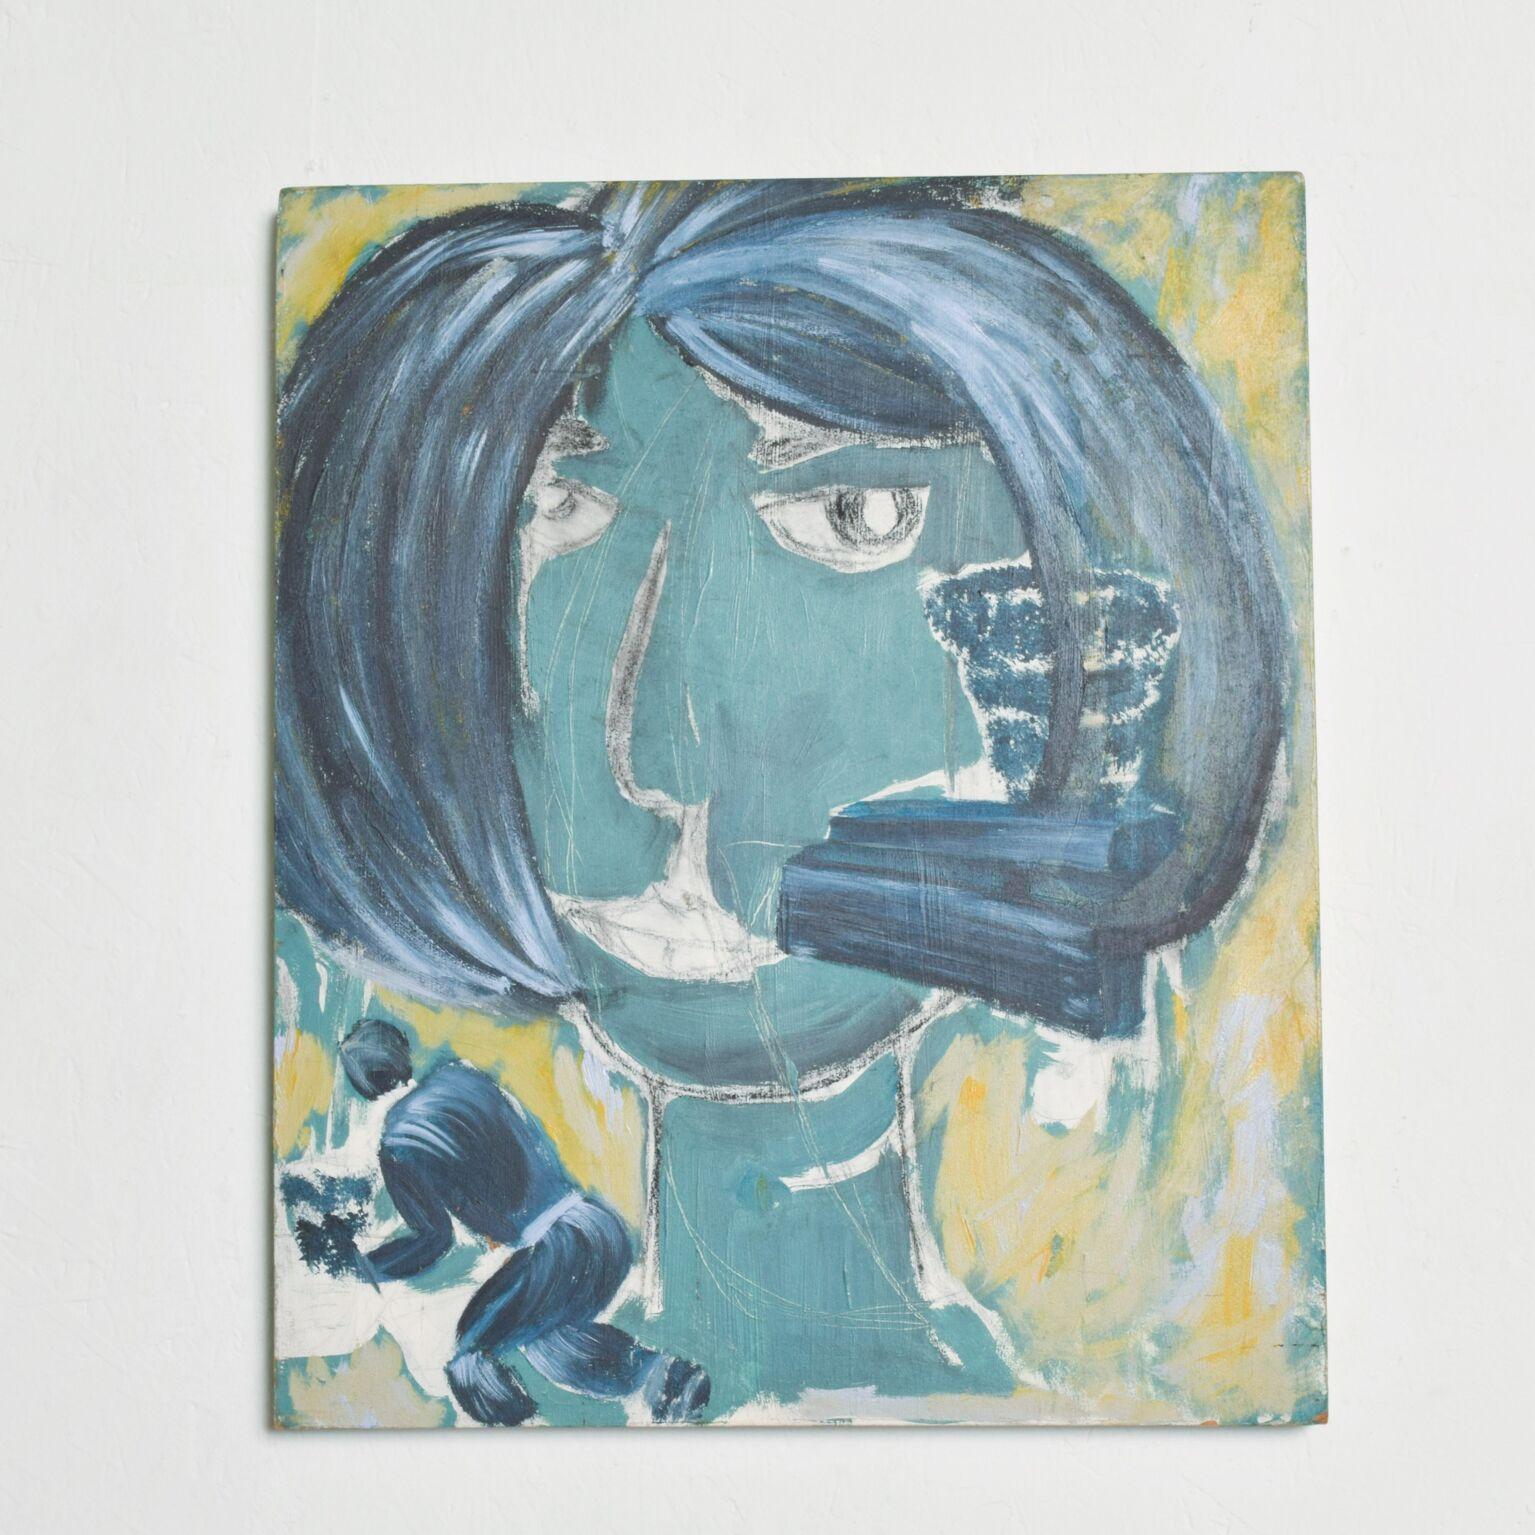 AMBIANIC presents
female subject artwork by Pablo Romo
blue acrylic painting on wood.
19.75 x 23.75x 1.5D
Original very good vintage condition.
Please refer to images present.